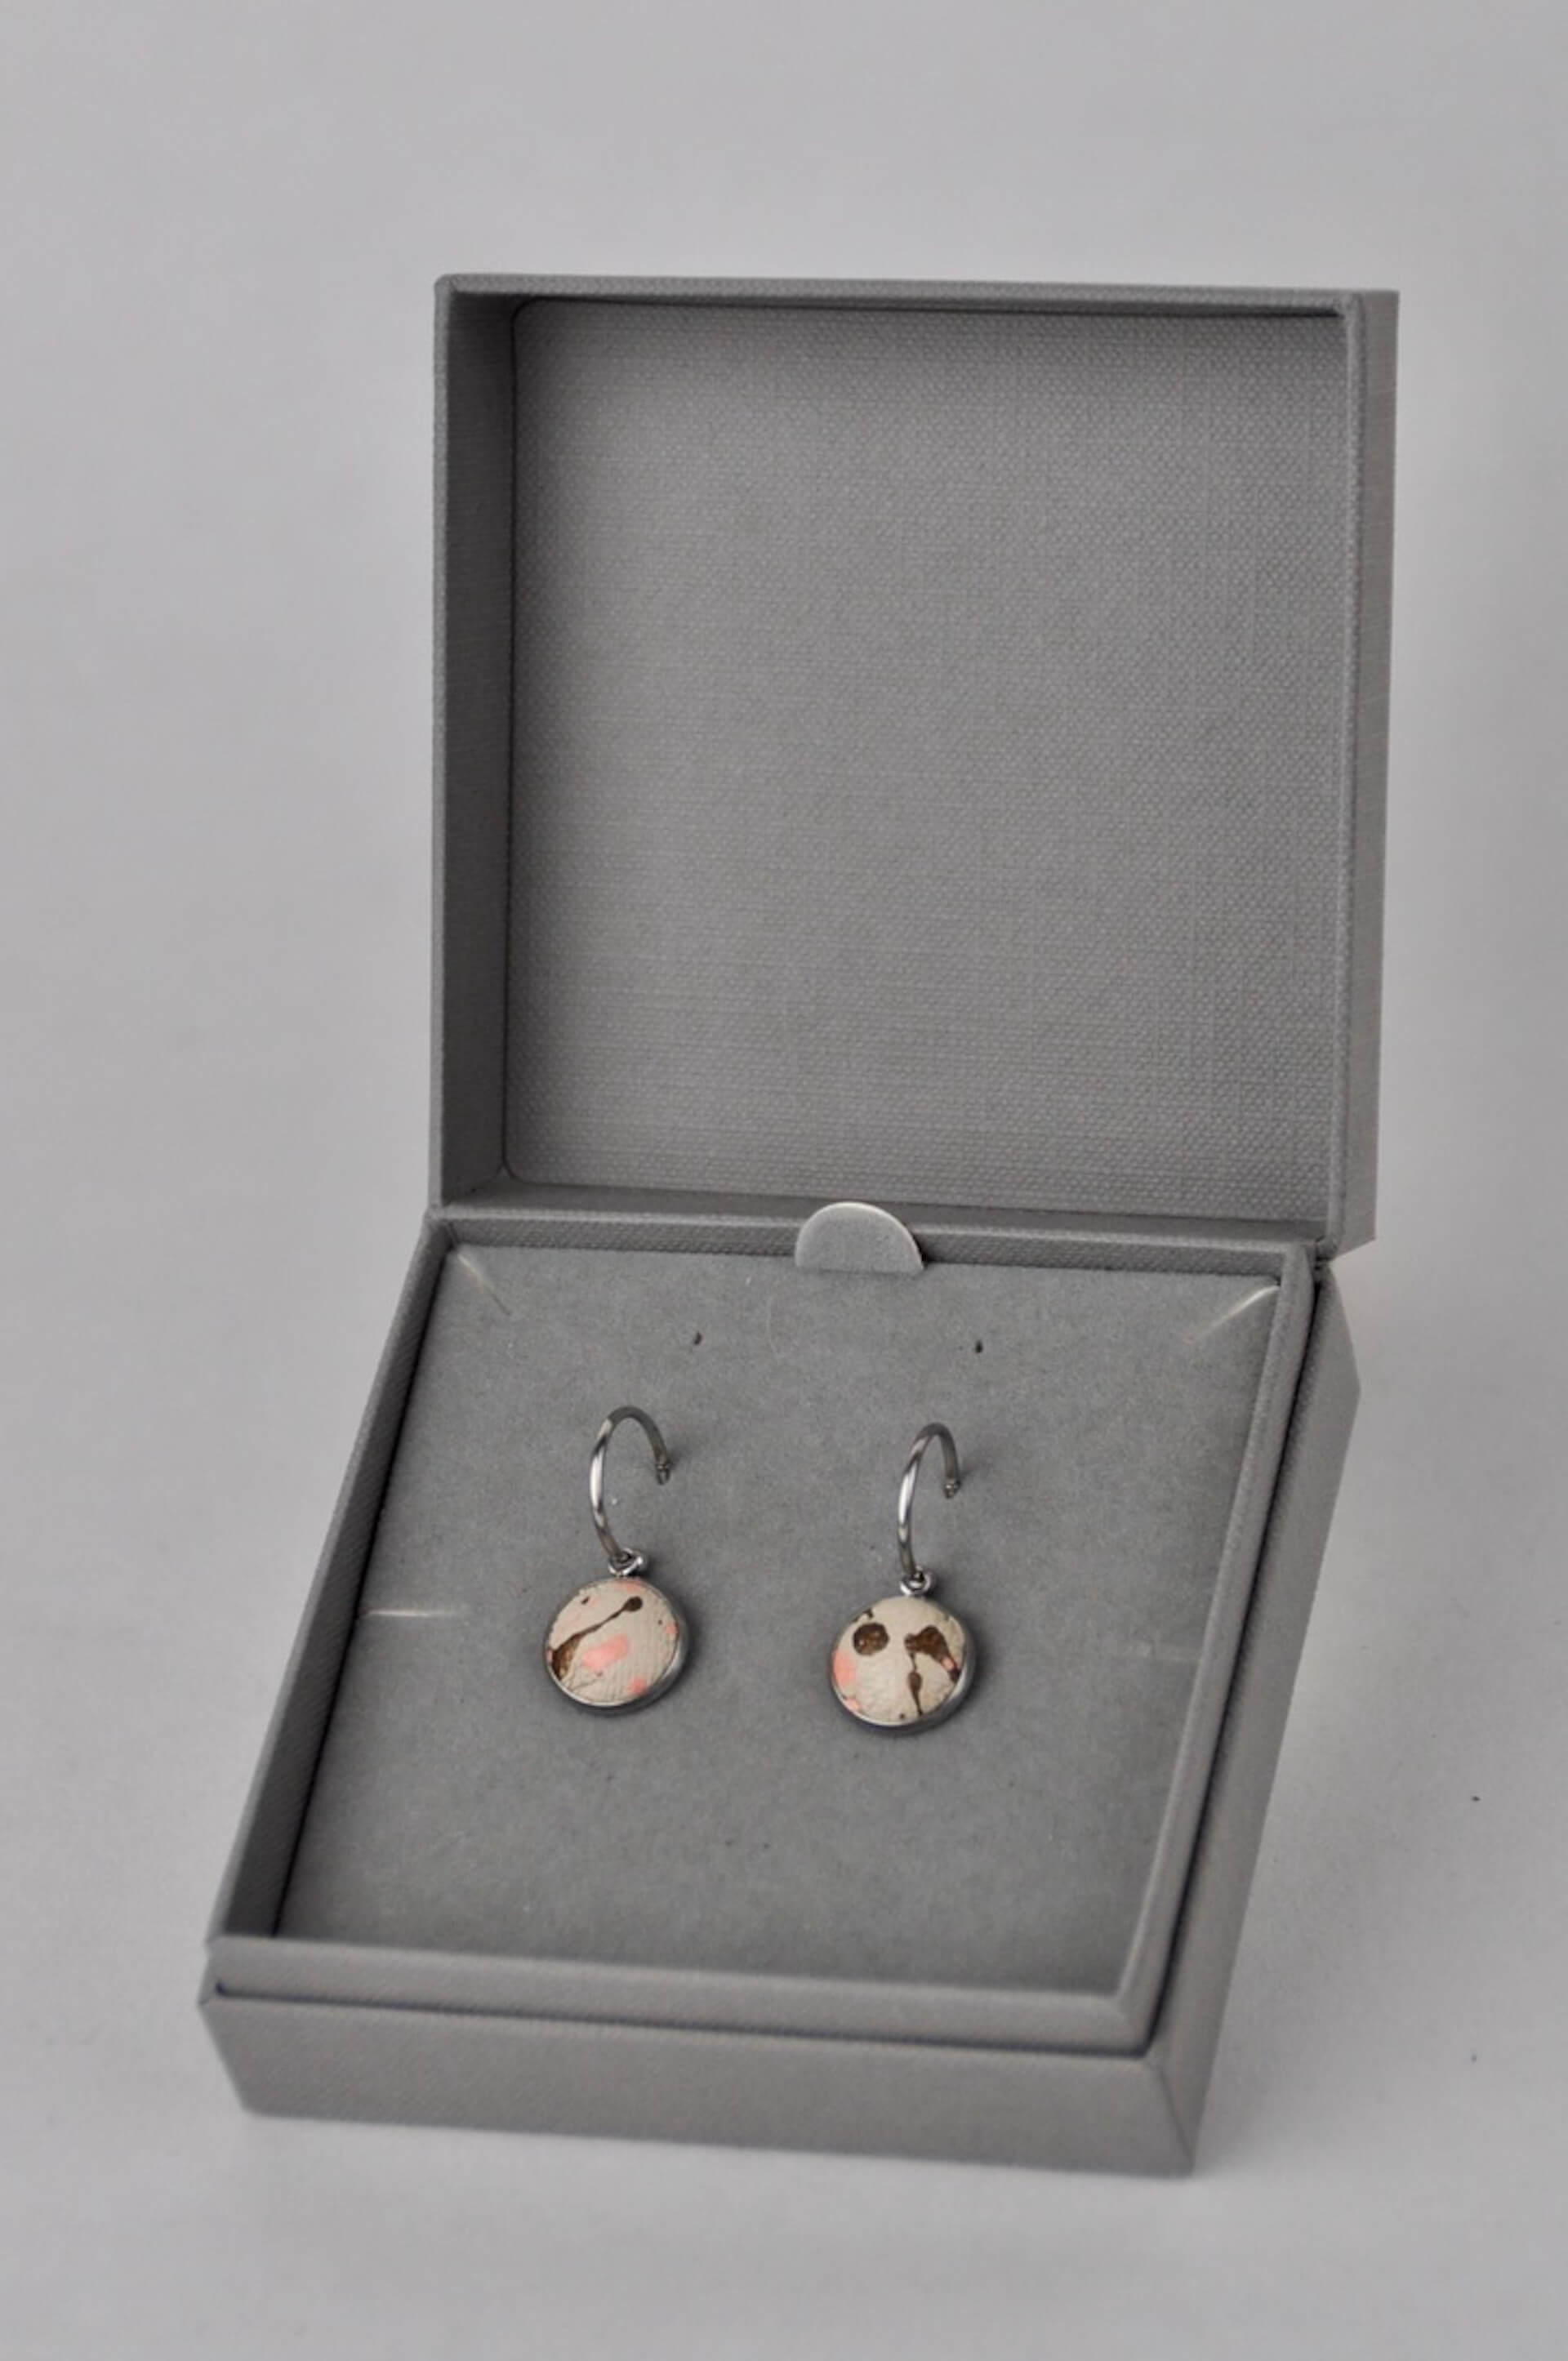 Bex & Bolt Earrings Beige Leather with Metallic Bronze & Peach Flecks (Stainless Steel Hoops) Stainless Steel Hoop Studs with Gift Box (multiple colours)